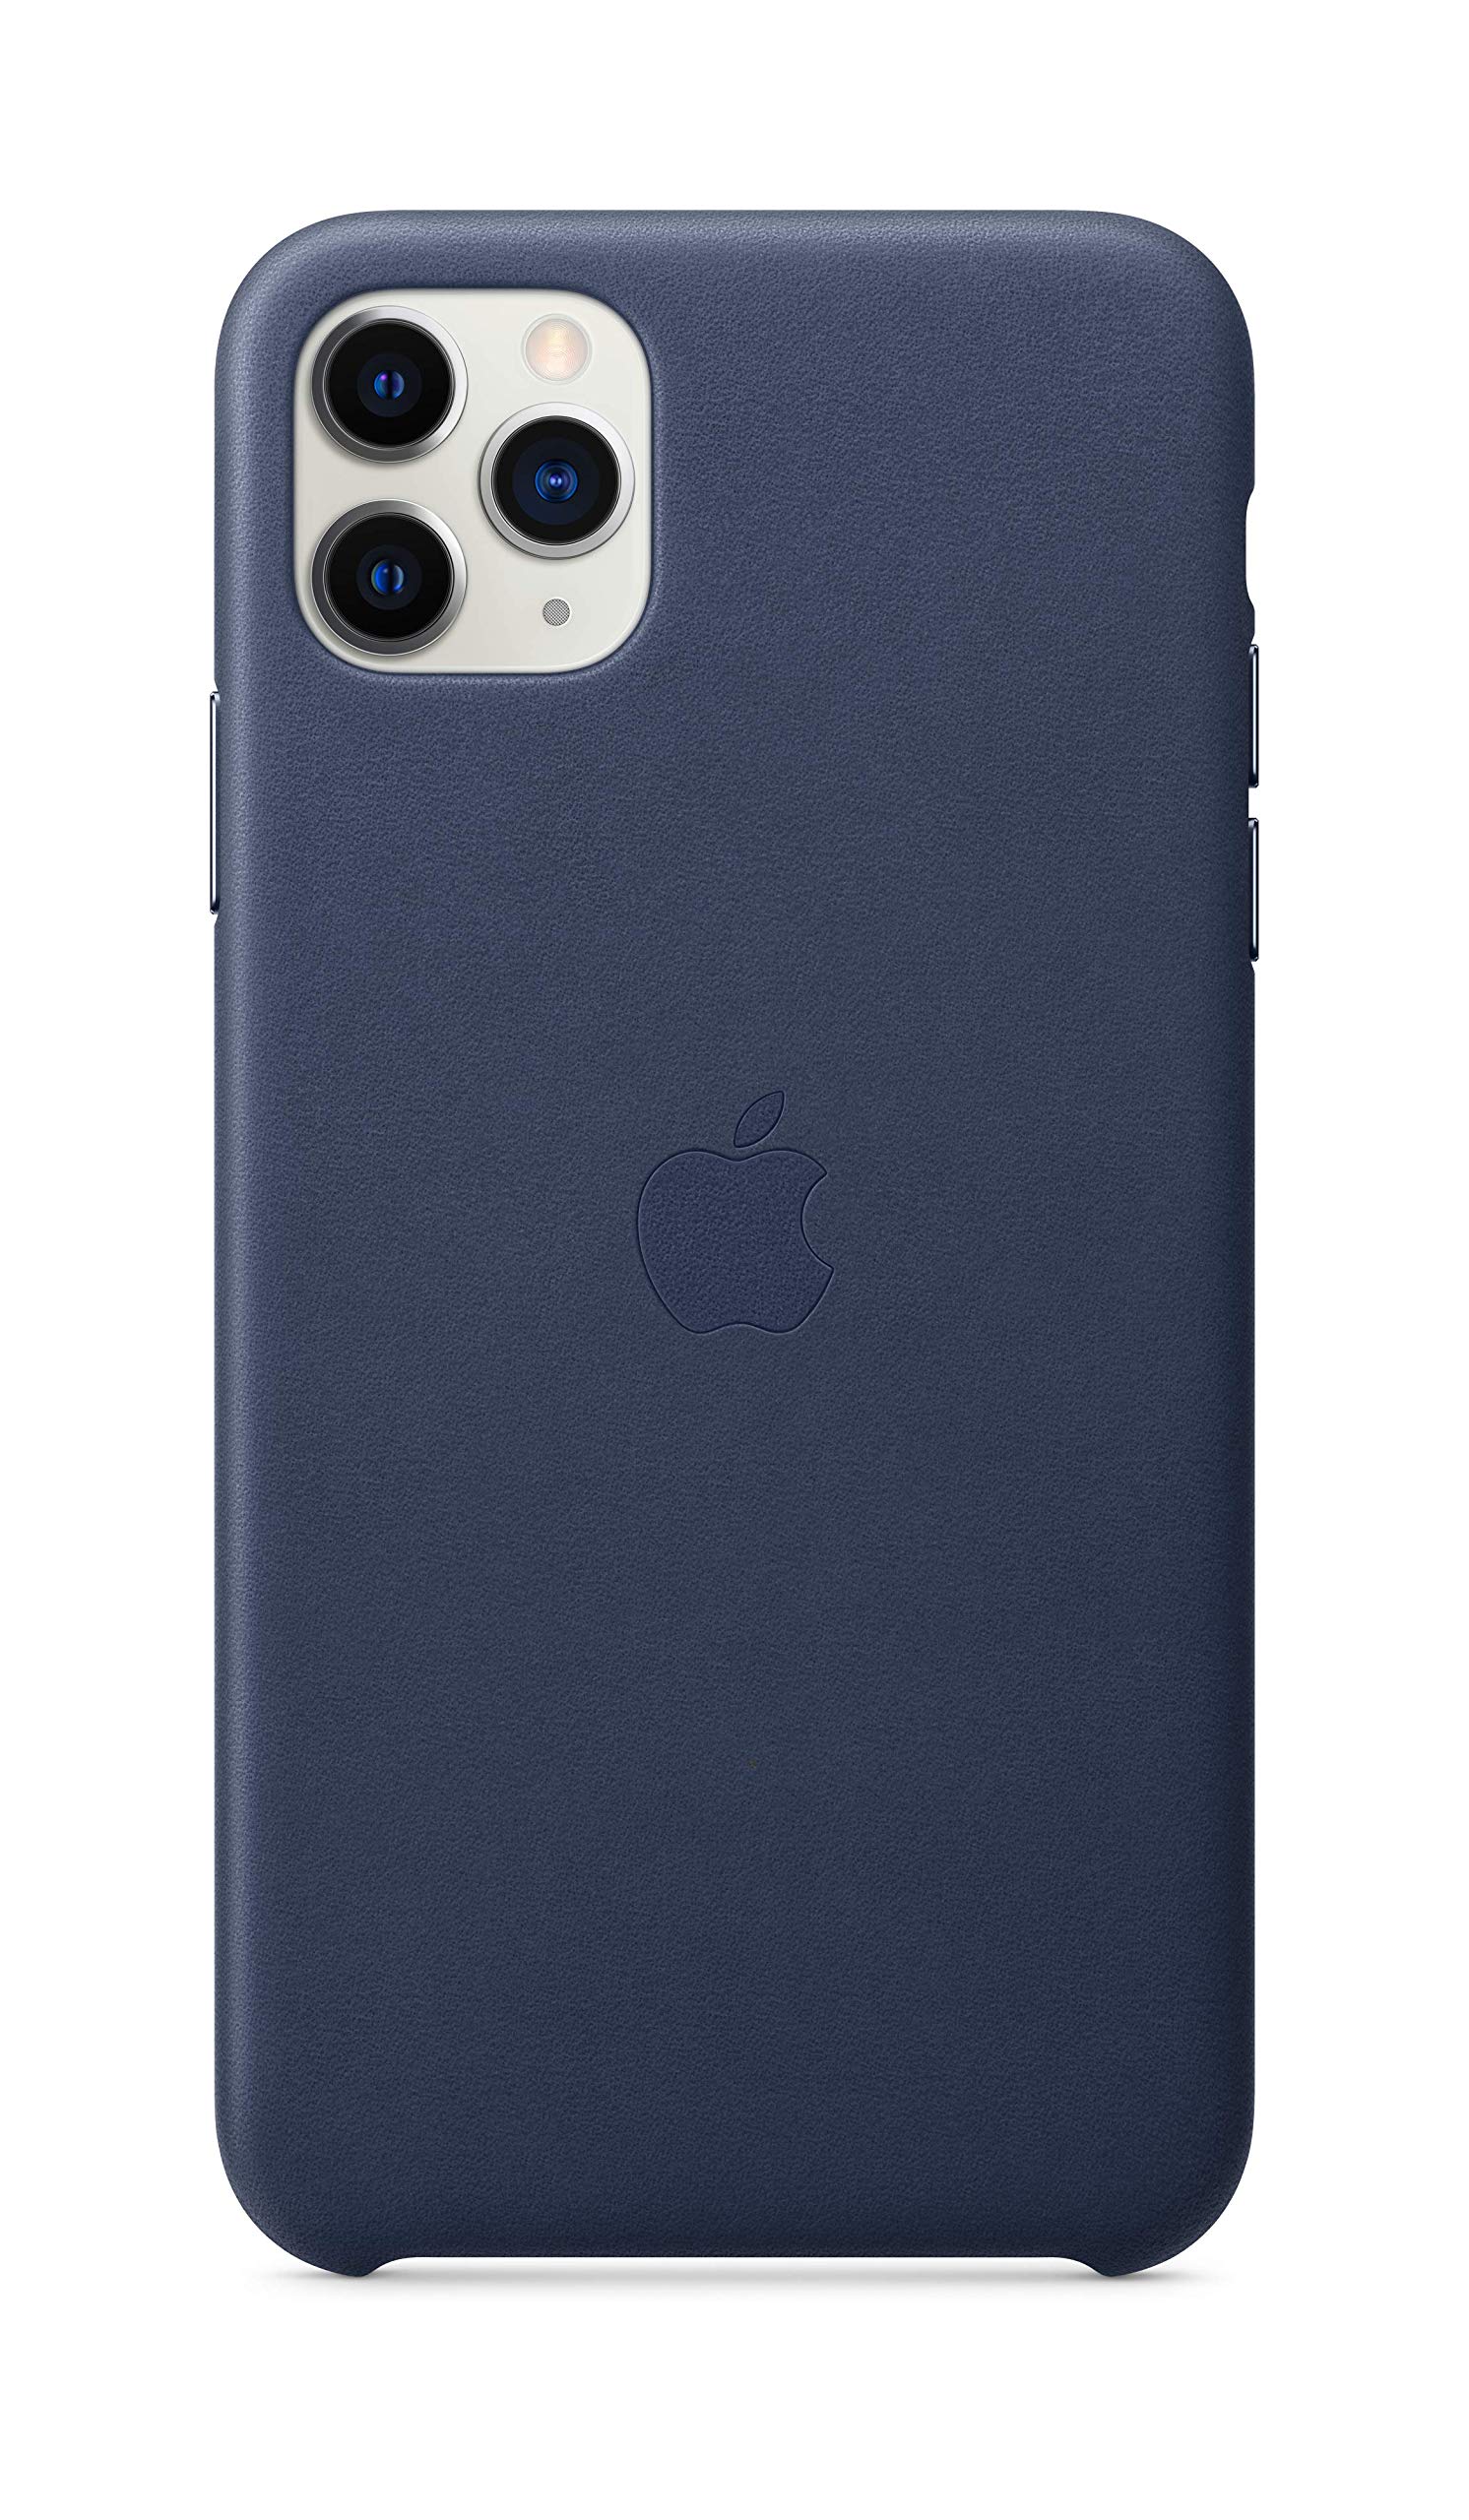 Apple iPhone 11 Pro Max Midnight Blue Leather Case - Slim Fit, Wireless Charging Compatible